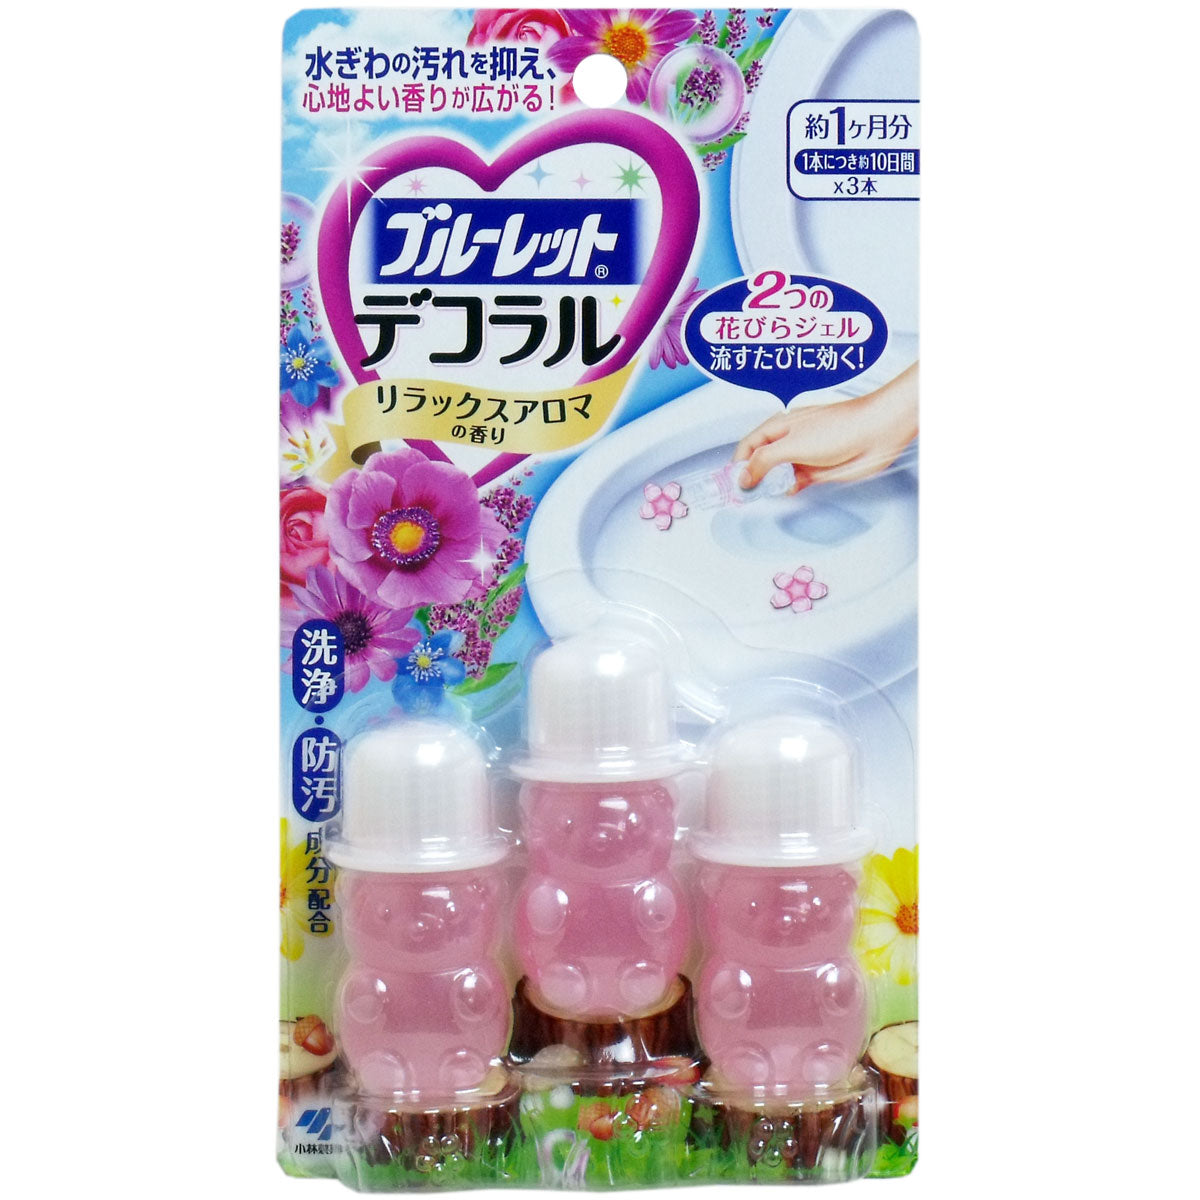 Bluelet Decoral Japan's Kobayashi Pharmaceutical Various scents such as forest and floral scent Bear shape for bath and toilet 7.5g single serving X 3 bottles